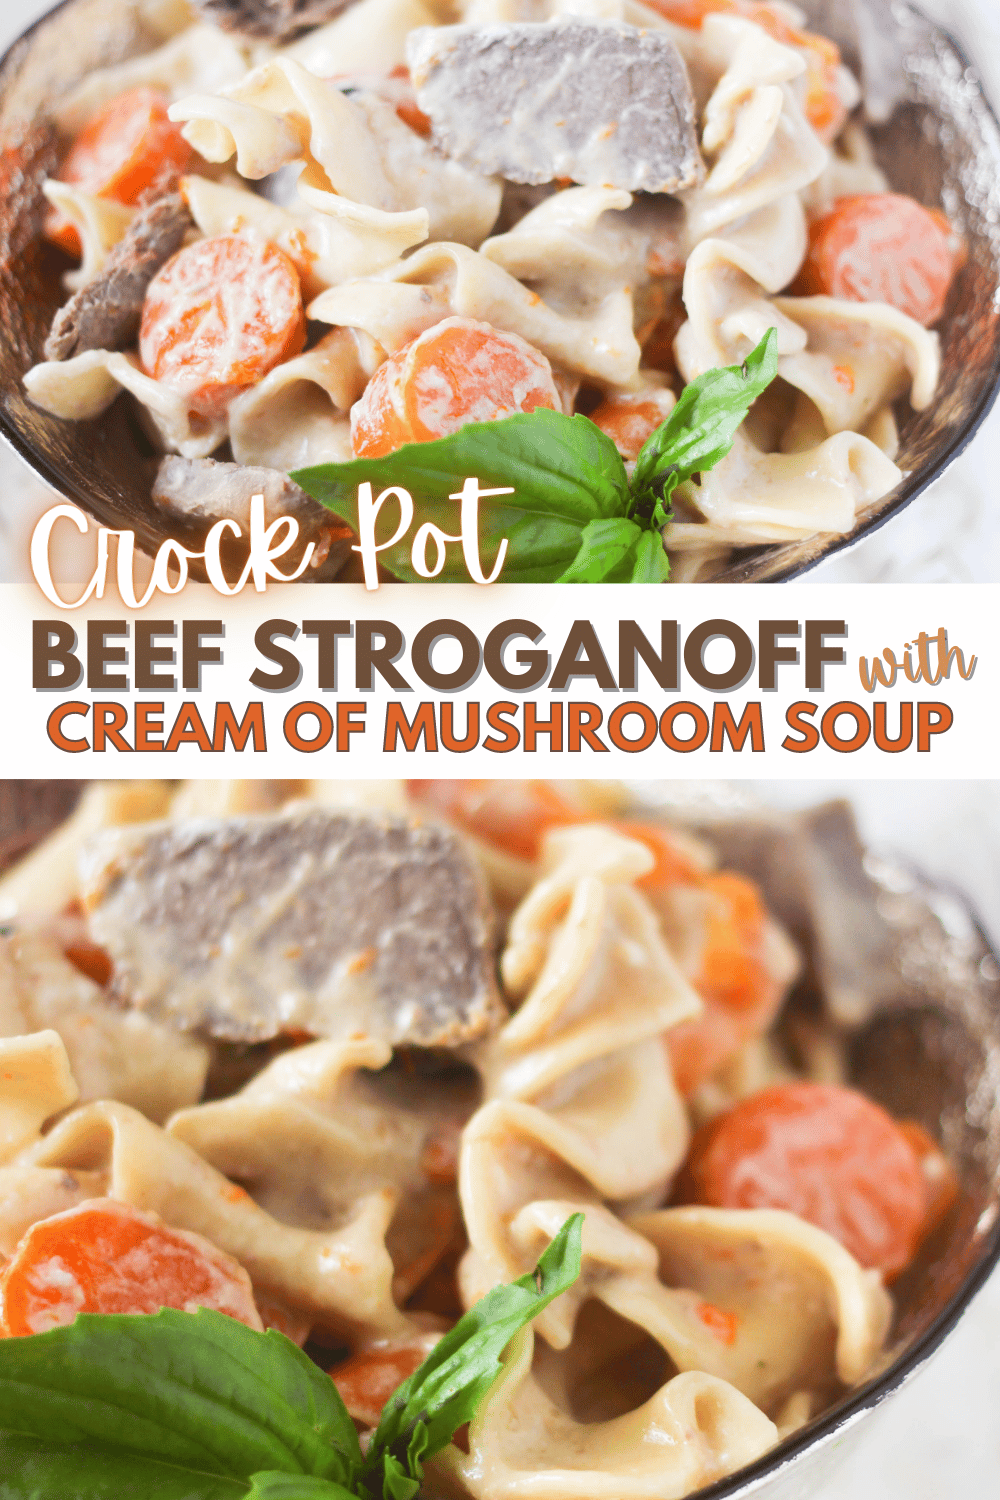 This Crock Pot Beef Stroganoff with Cream of Mushroom Soup is an easy and delicious weeknight meal that the whole family will love! #crockpotstroganoff #beefstroganoffrecipe #beefstroganoff #creamofmushroomsoup via @wondermomwannab